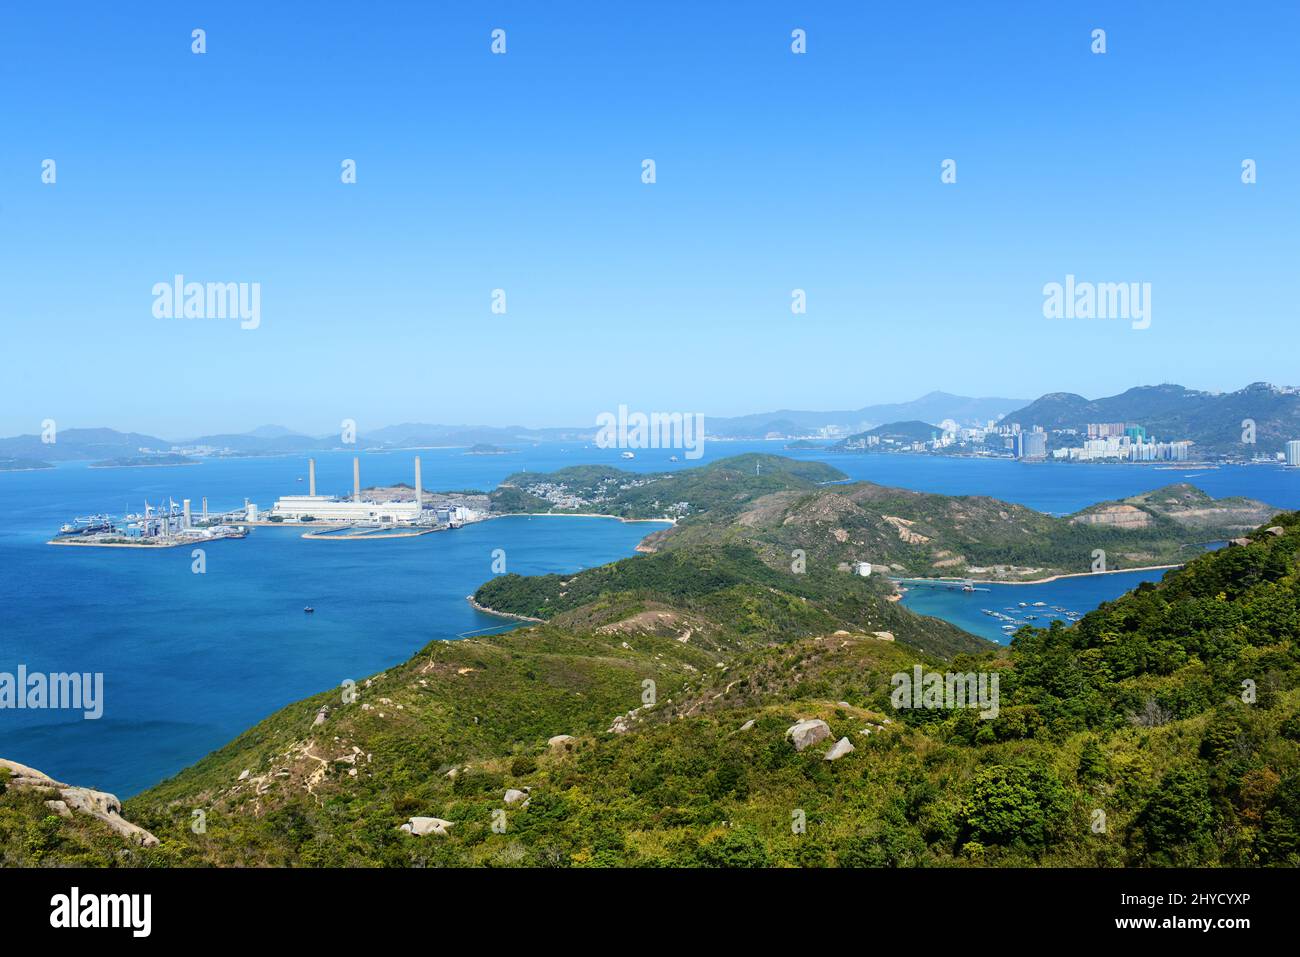 A view of Lamma island from the top of Mount Stenhouse. Stock Photo